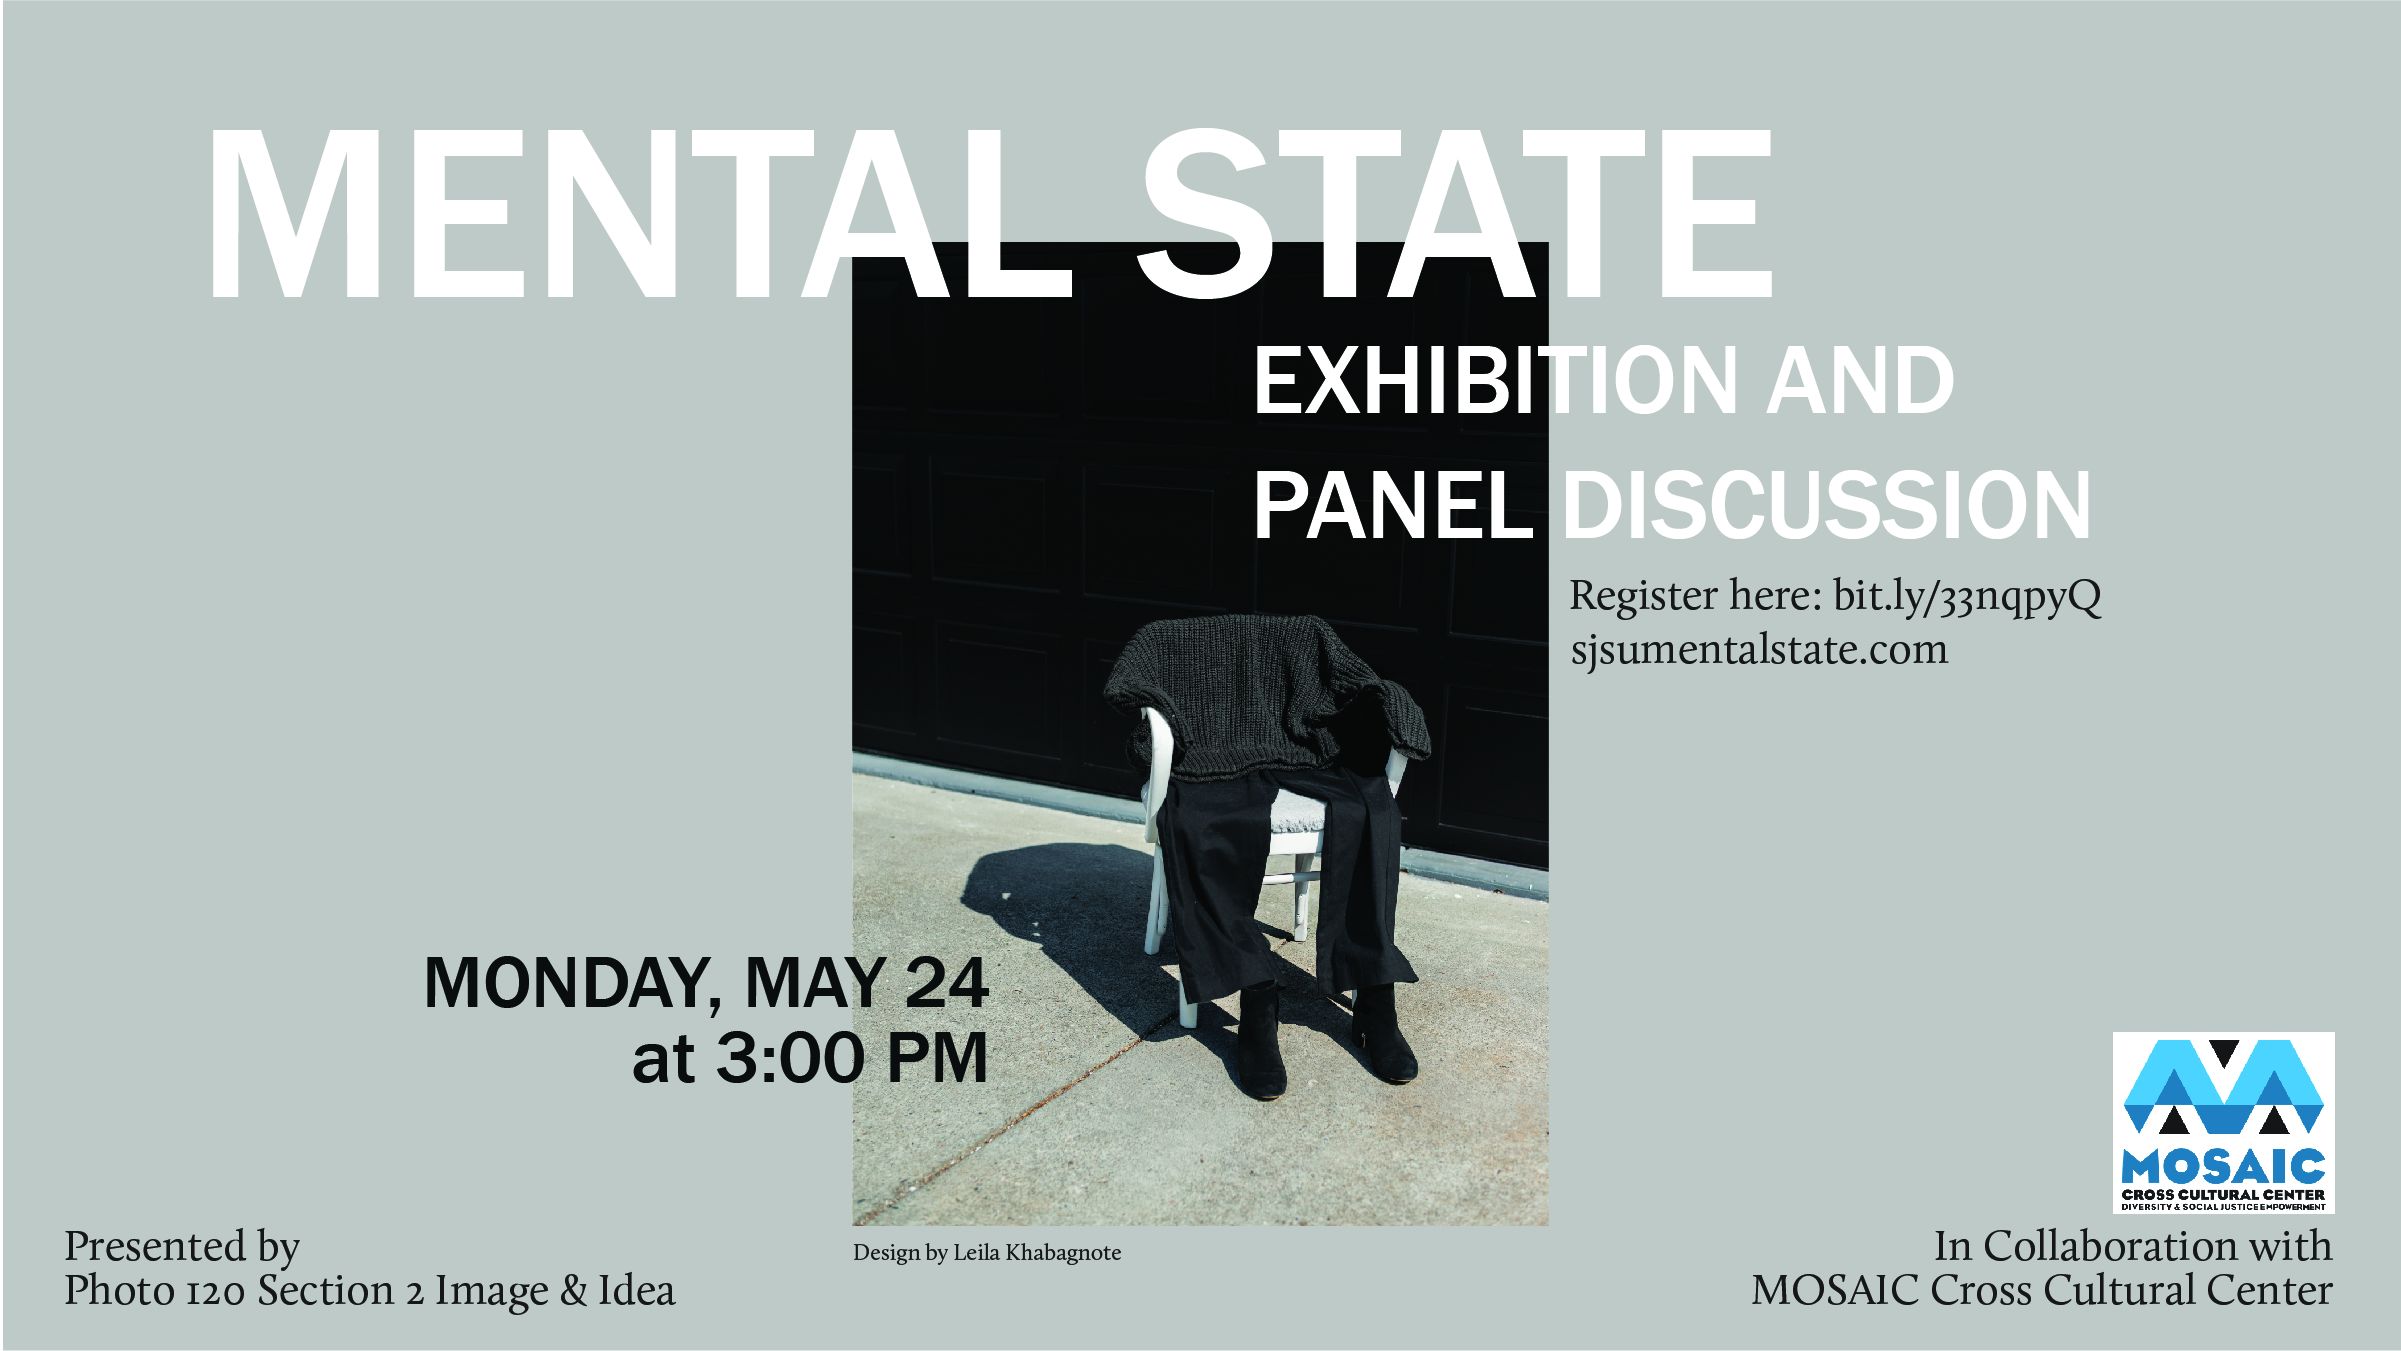 Mental State exhibition flyer